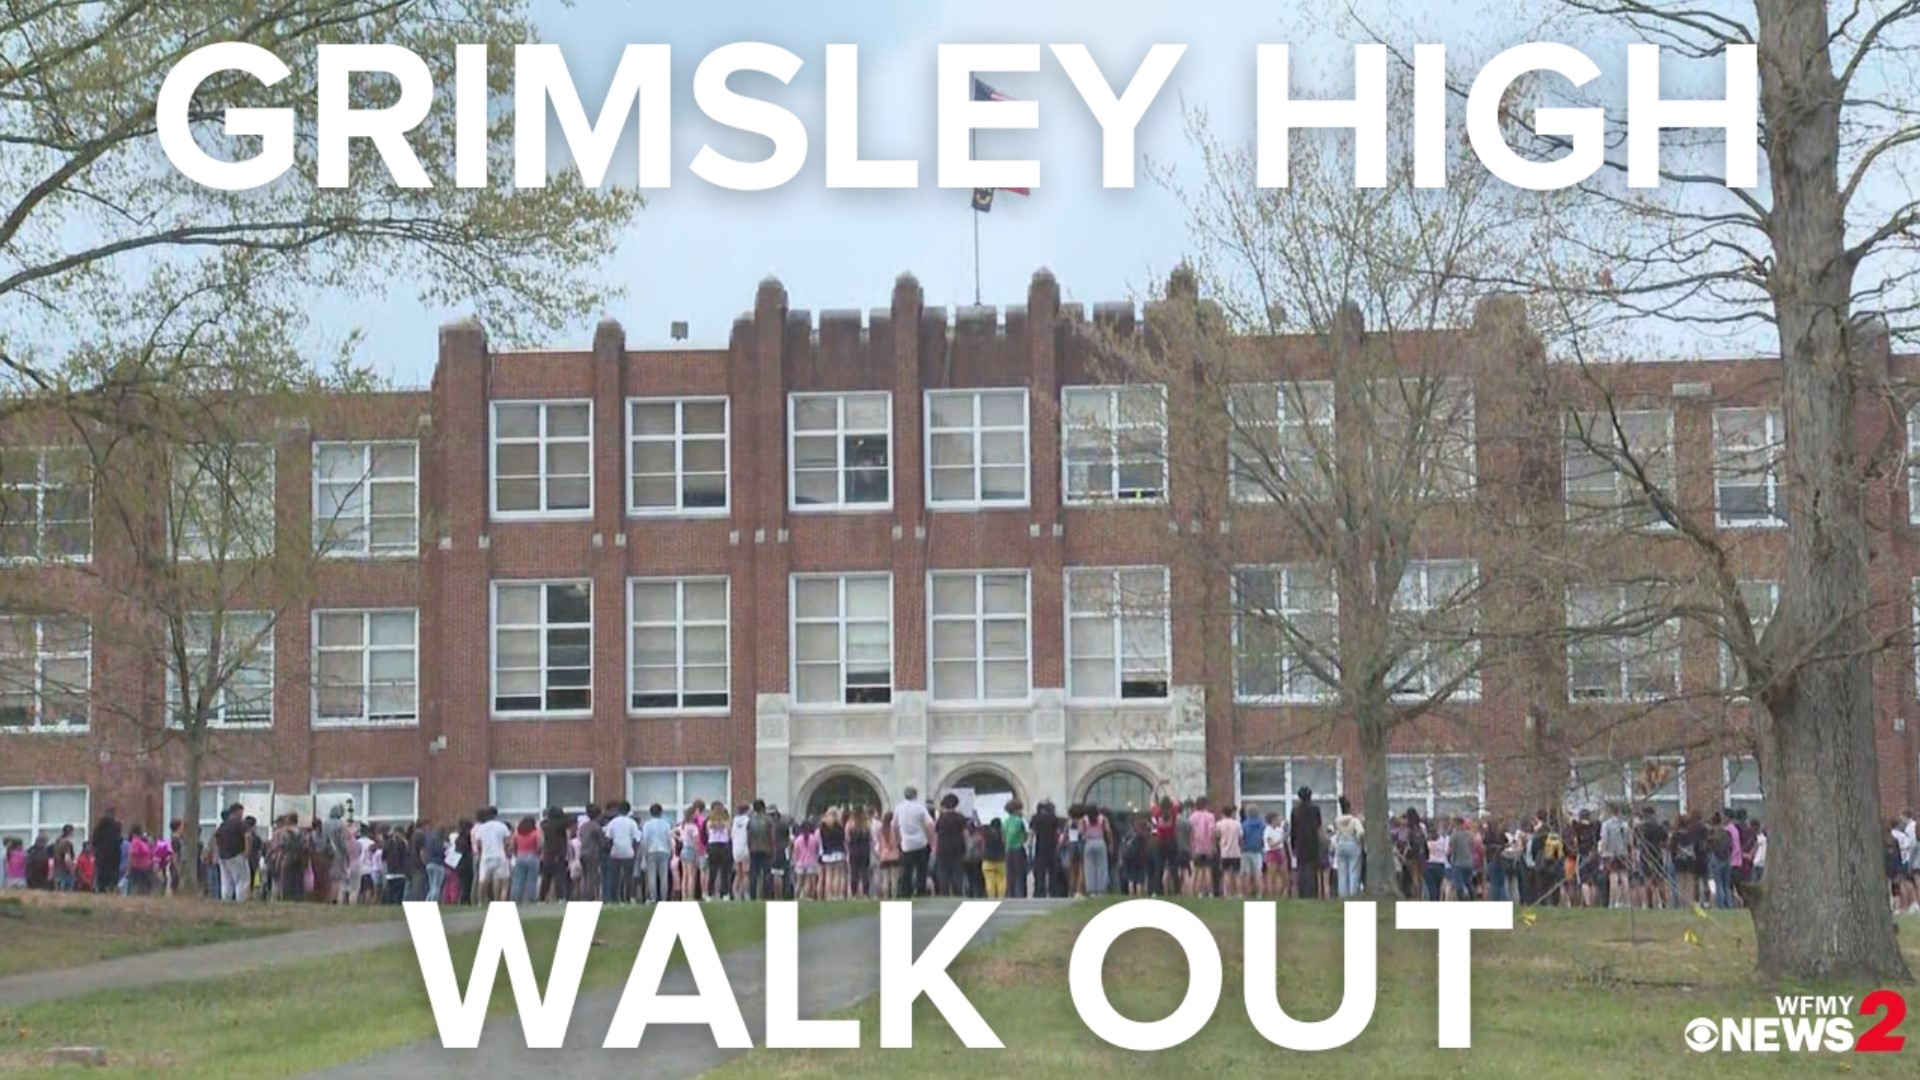 Students at Grimsley High School in Greensboro walked out to demand action on gun violence.